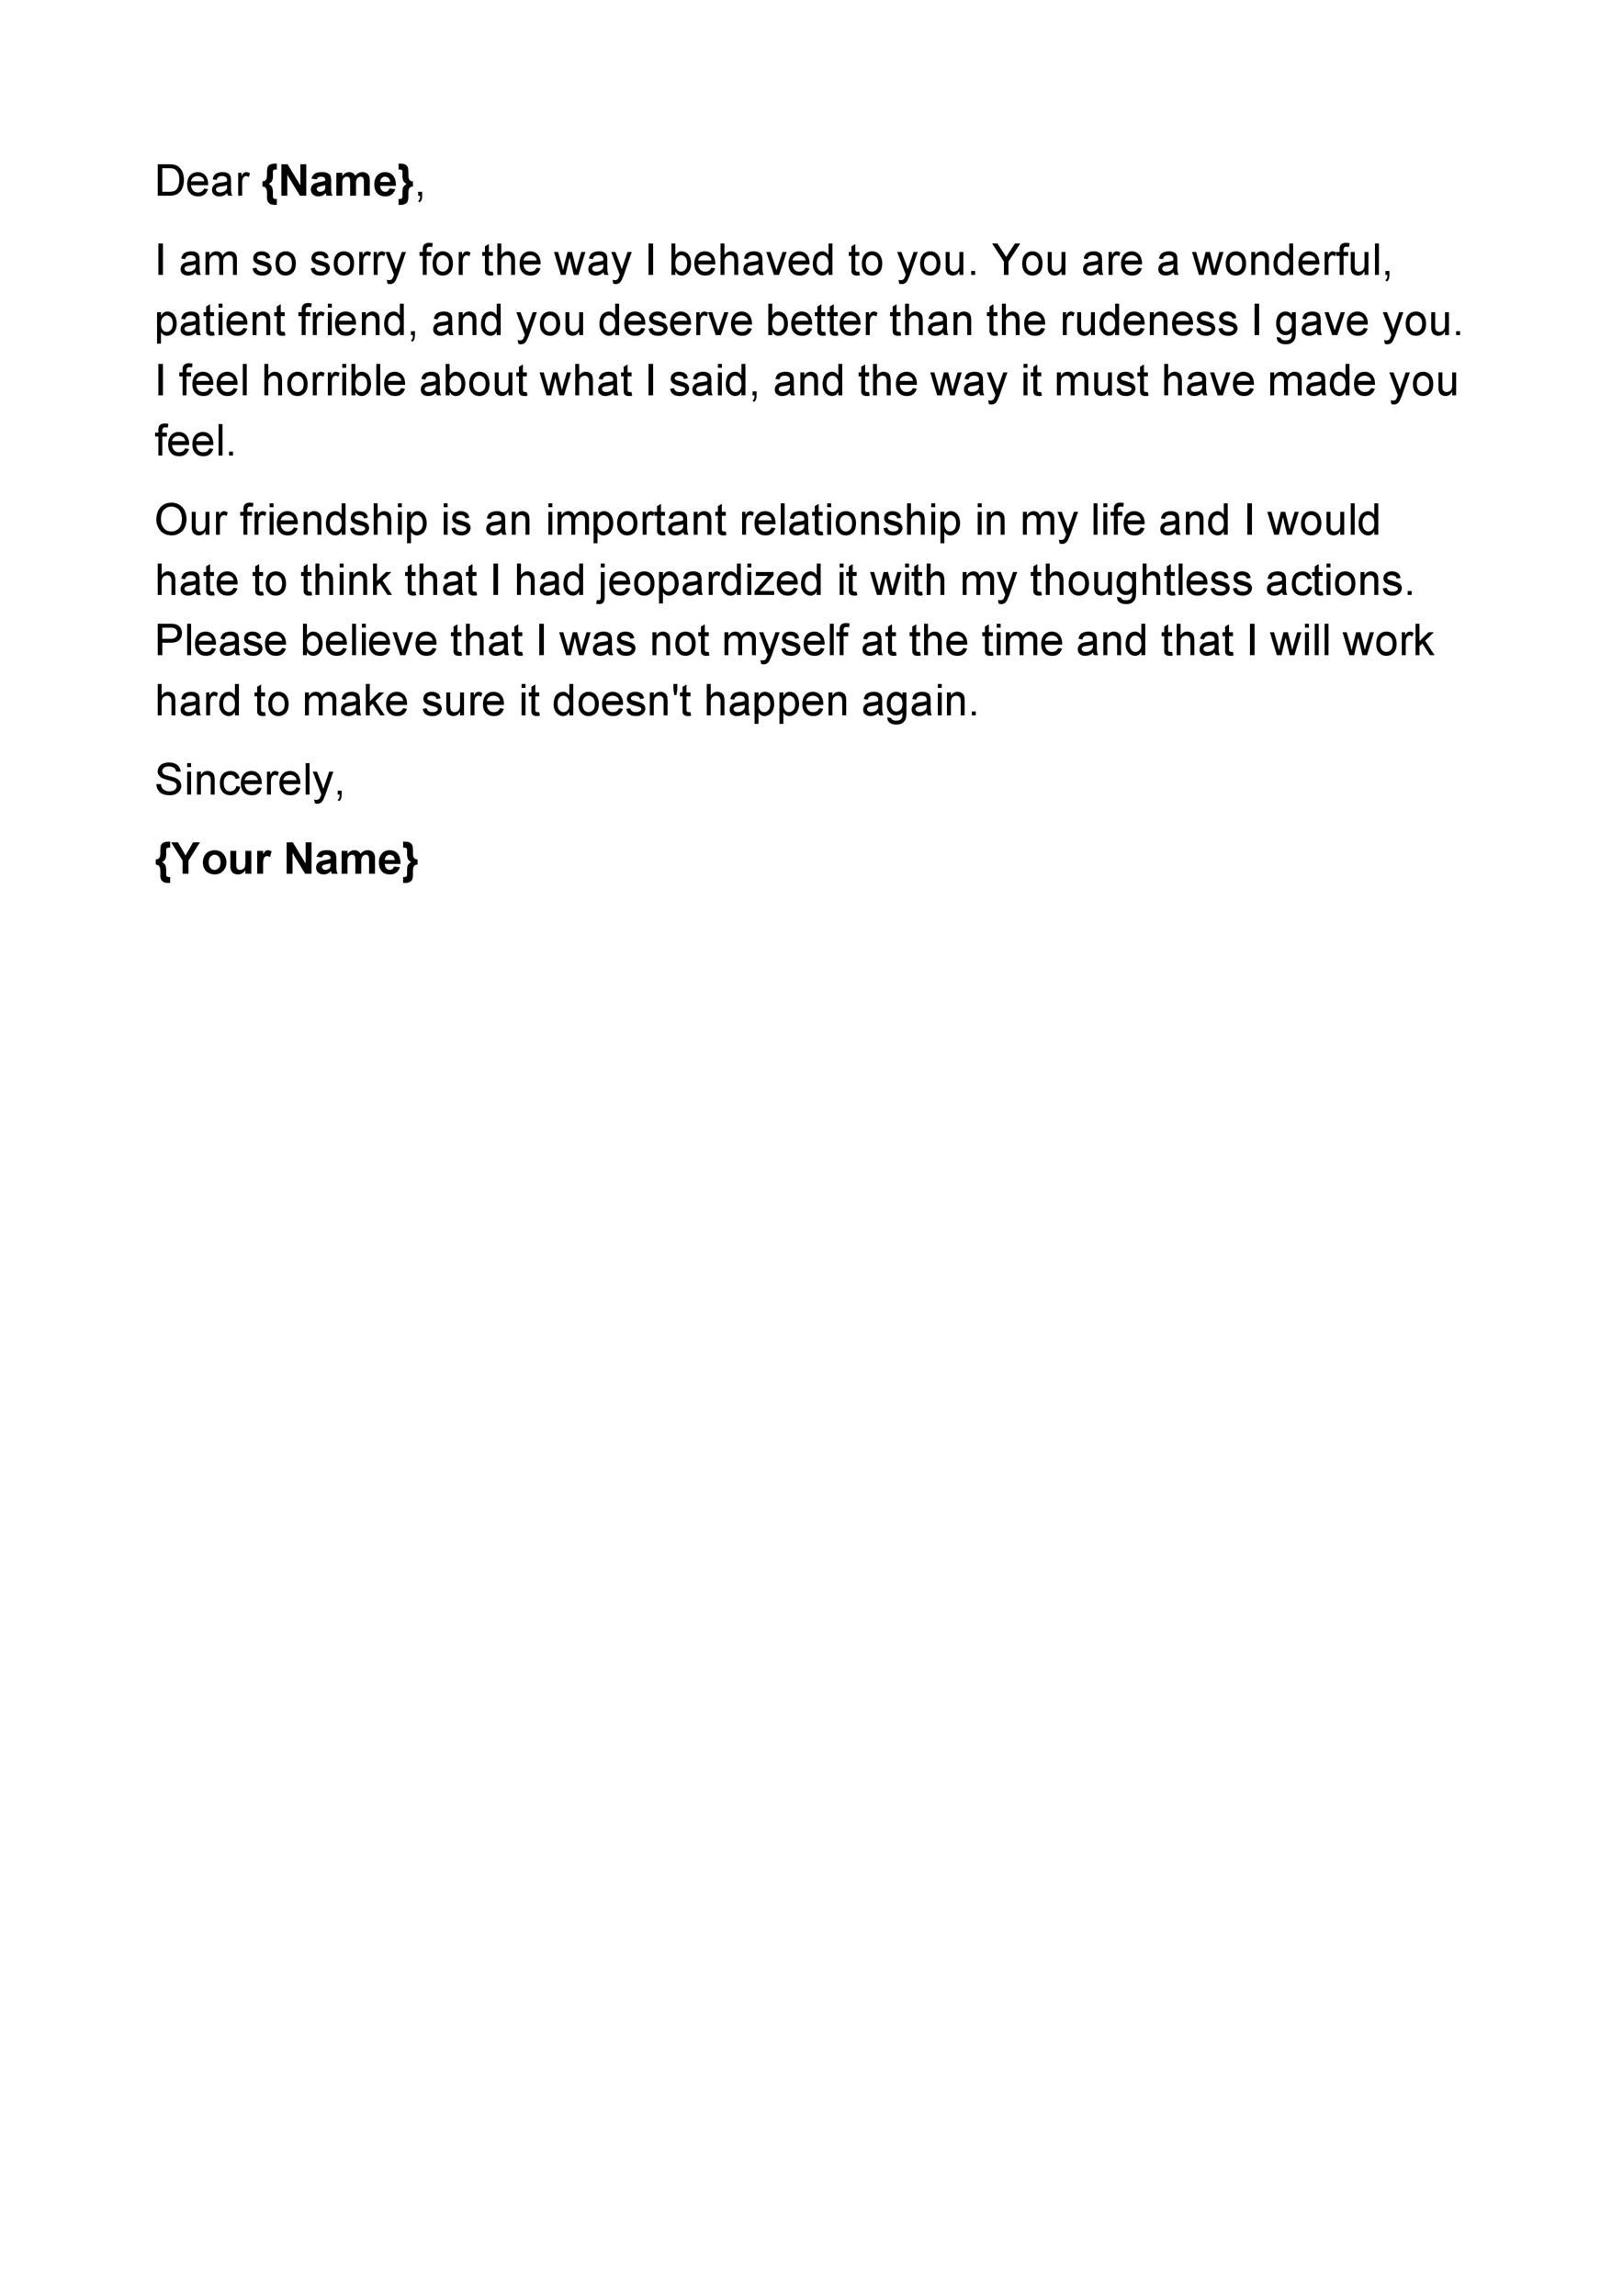 apology-letter-template-for-mistake-format-sample-example-best